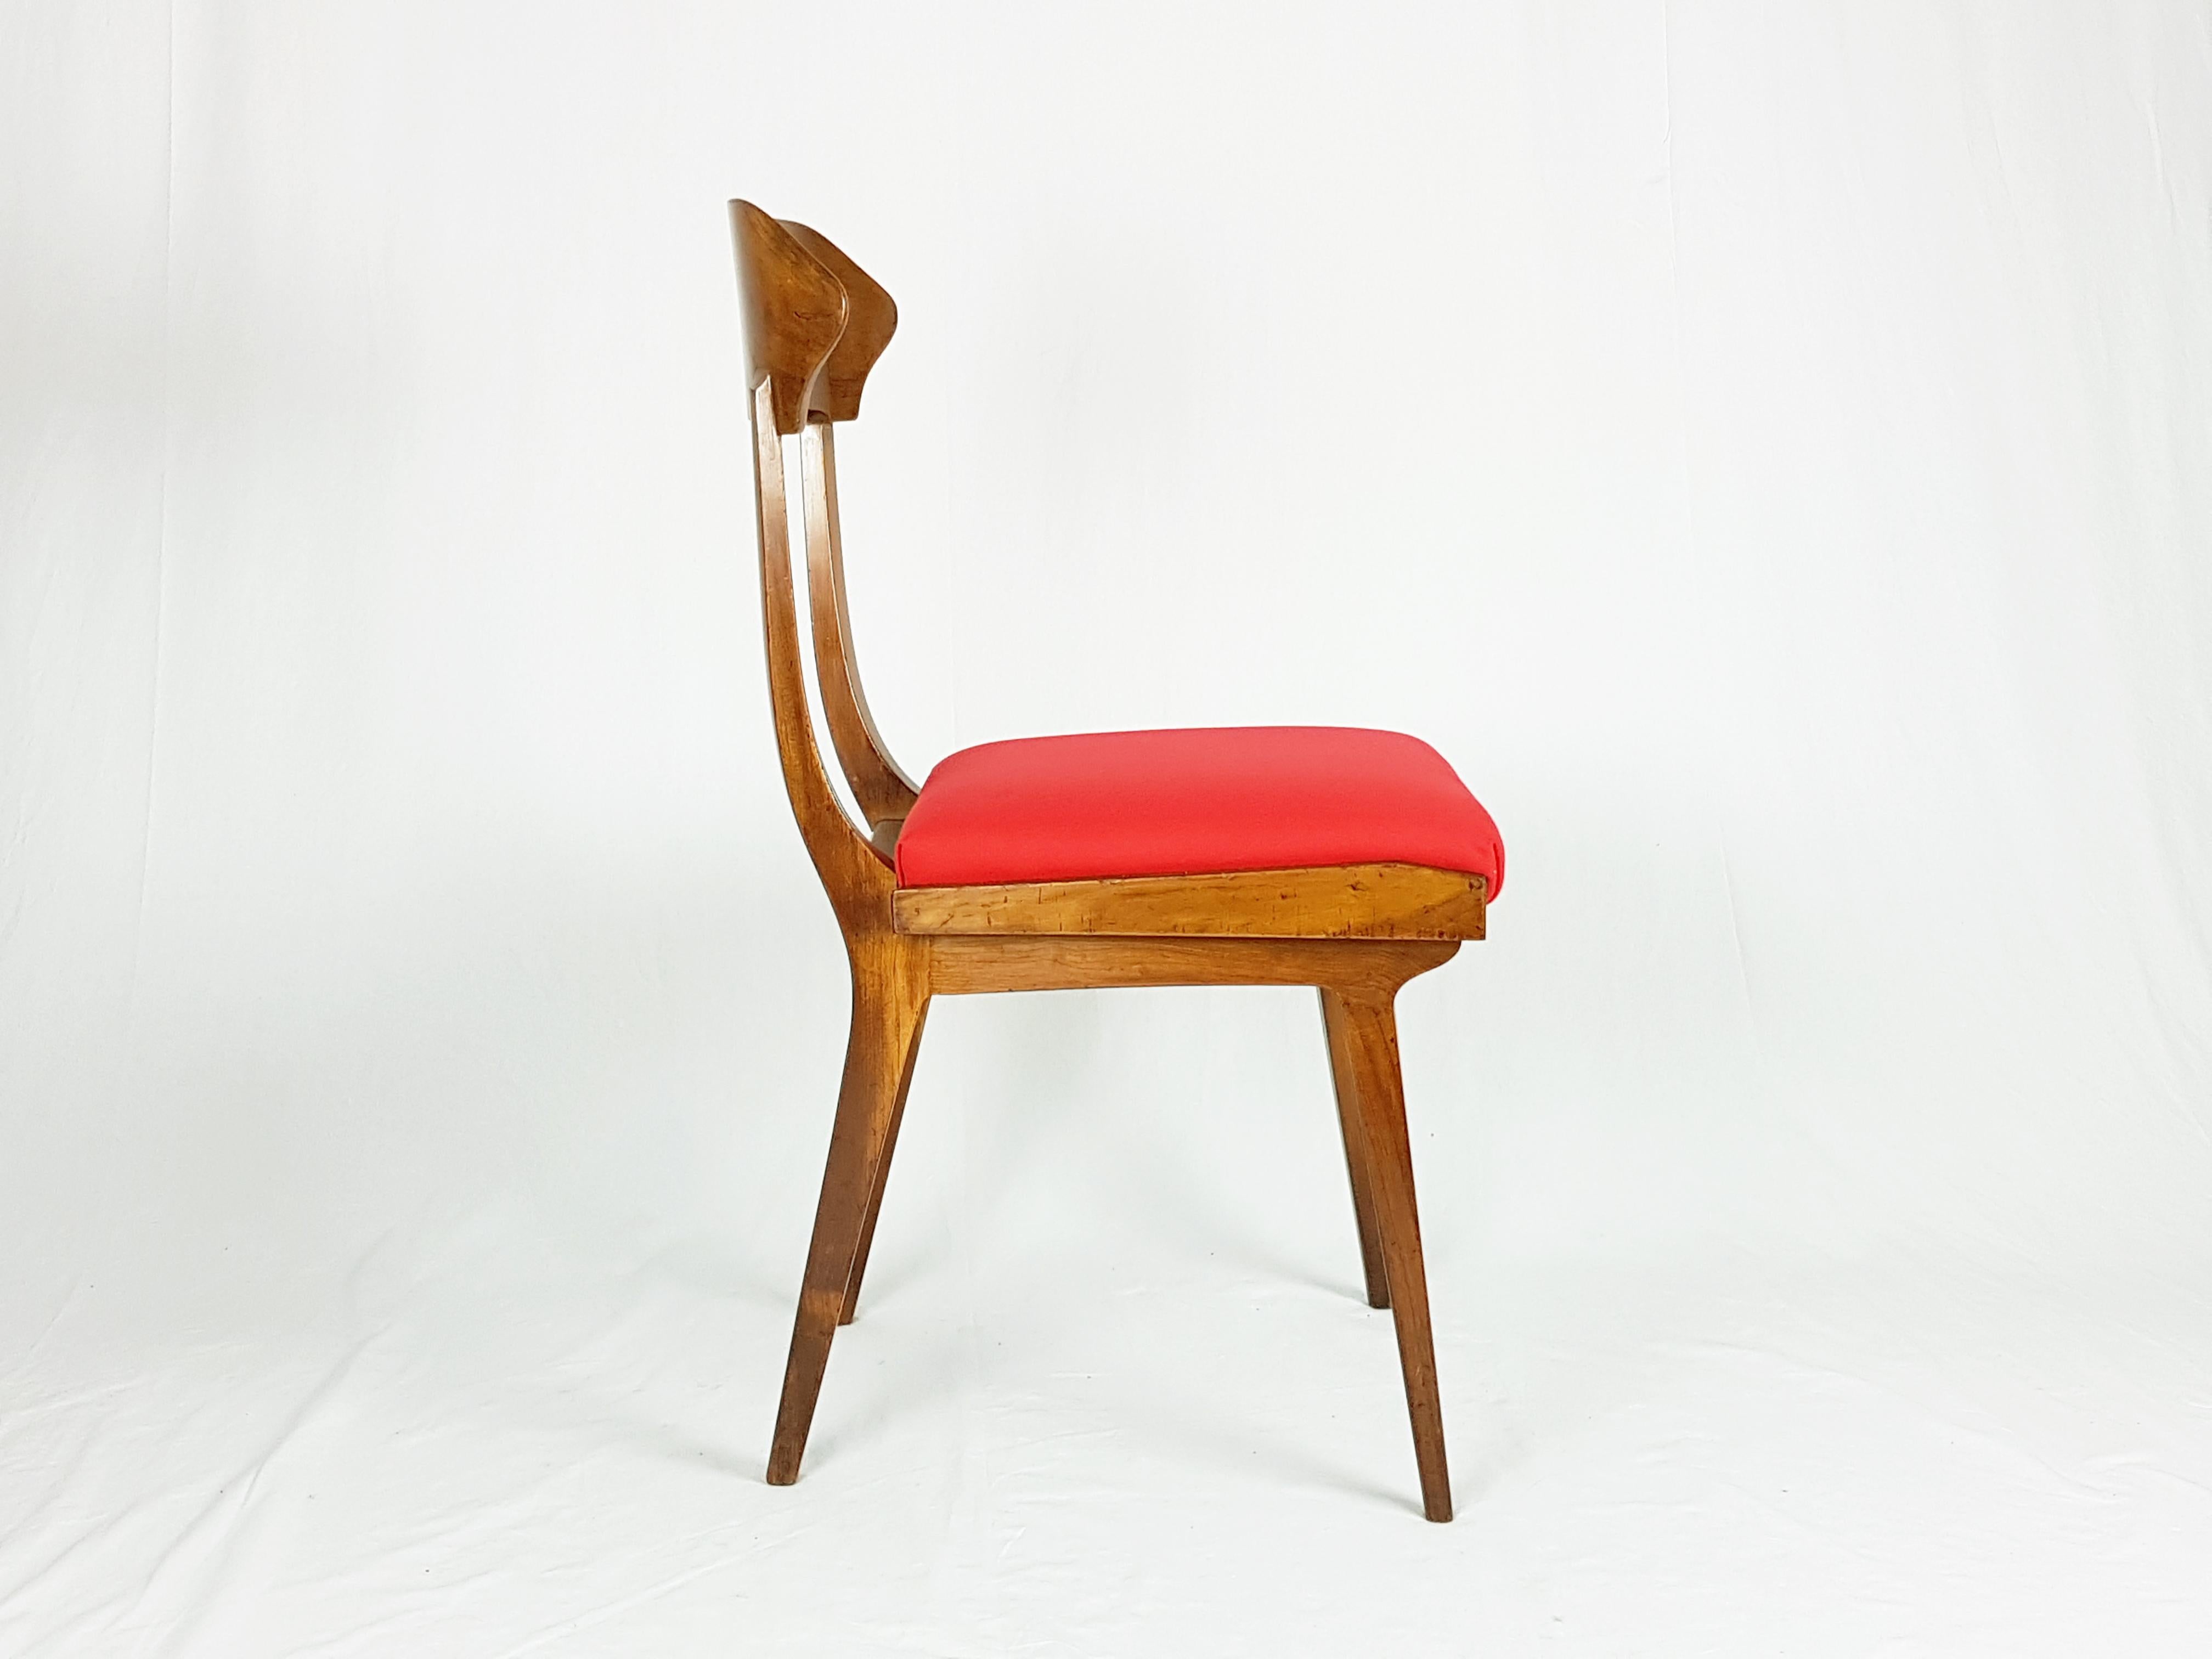 Pair of wooden and red fabric chairs manufactured by Fratelli Barni from Seveso (Milan) in 1950s. Very good condition: chairs have been partially restored and reupholstered. Manufacture label beneath the seat.